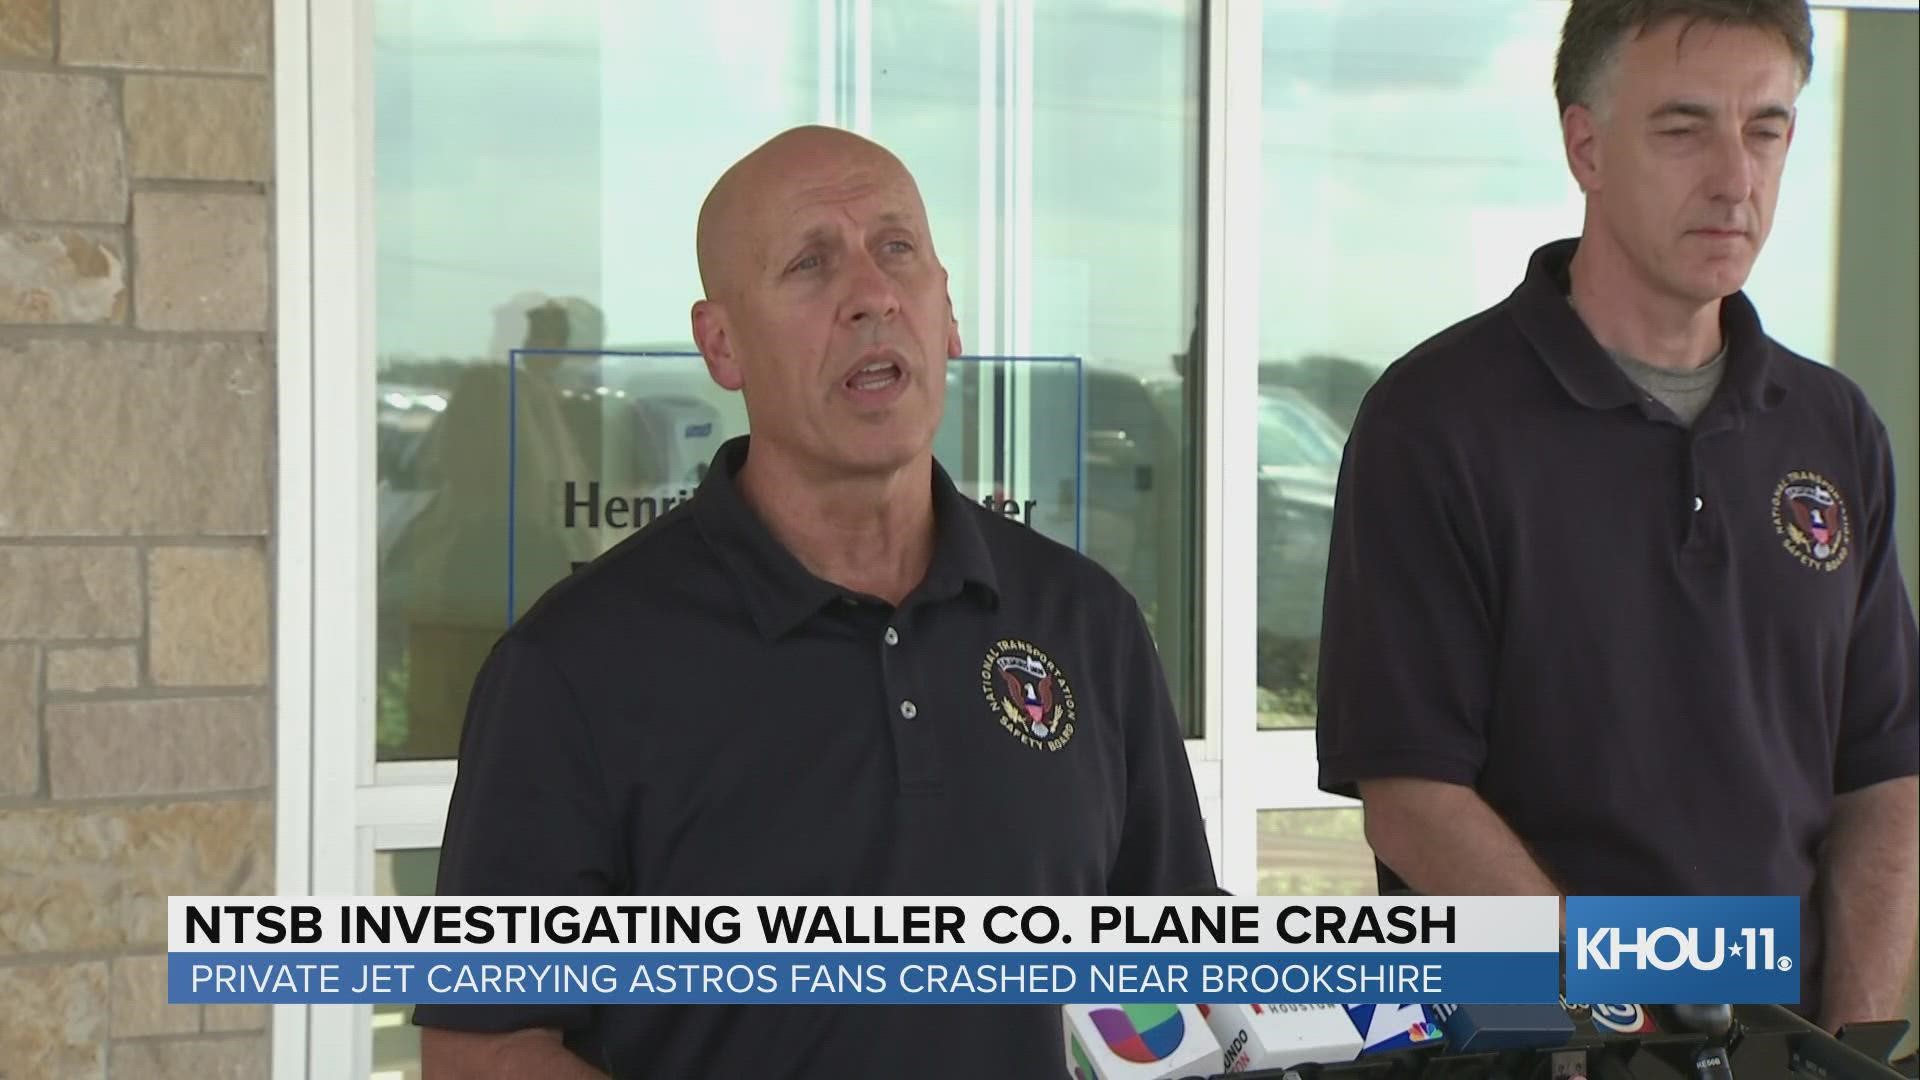 NTSB investigators give an update after a private plane carrying Astros fans crashed in Waller County while taking off for Boston. Only minor injuries reported.